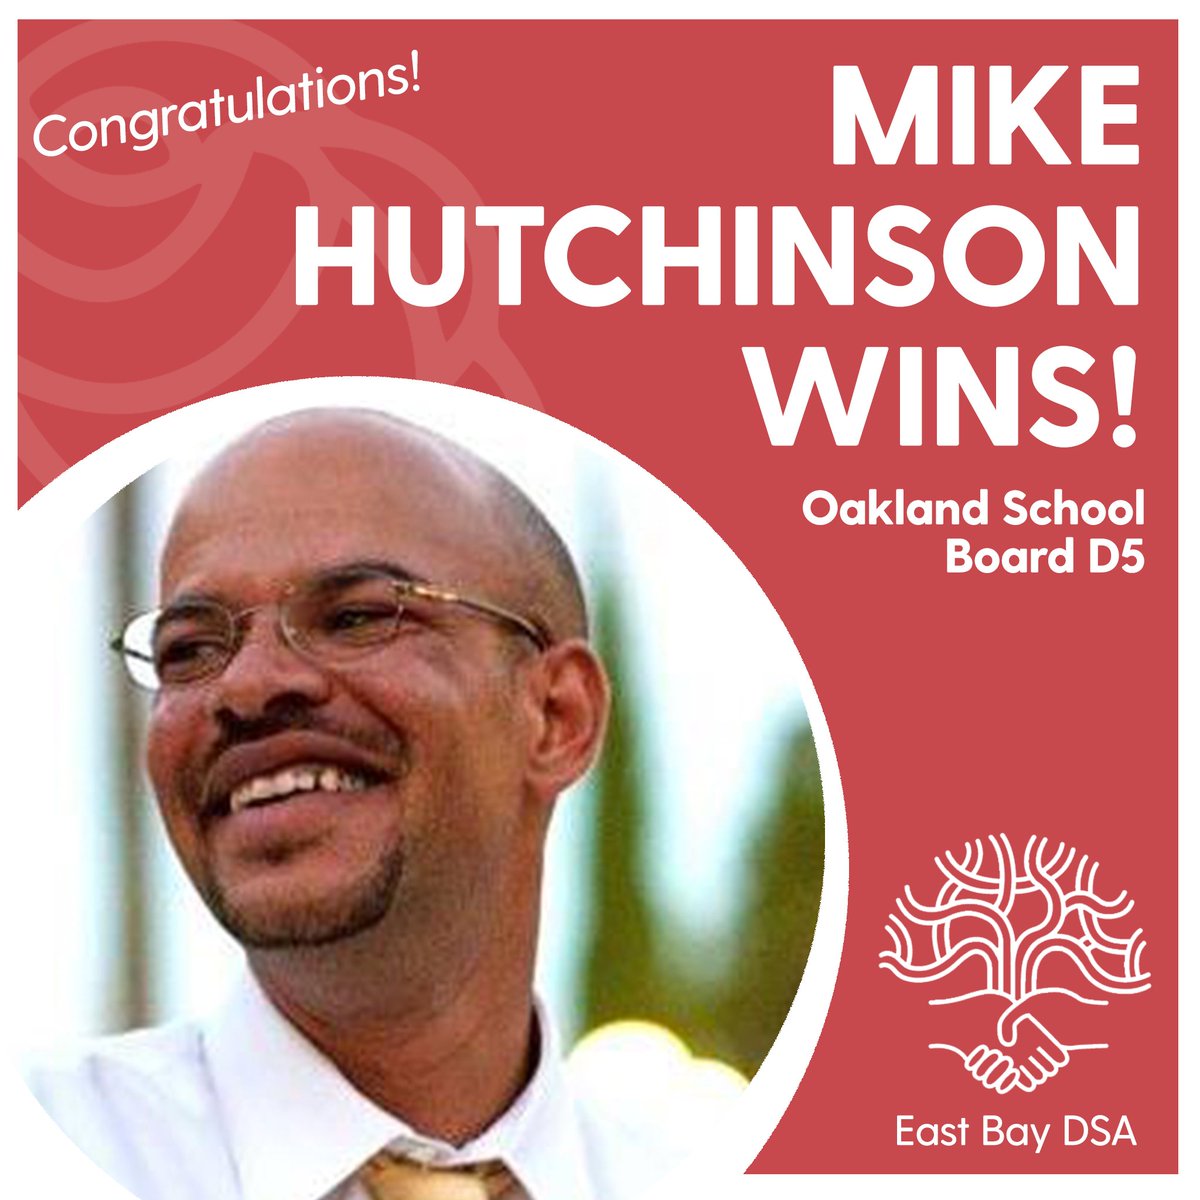 Another win! Bloomberg poured *half a million dollars* into Oakland school board races this year, but that wasn't enough to beat Mike Hutchinson!Mike's deep knowledge of the school system, unflagging opposition to systemic racism, school closures & privatization won out